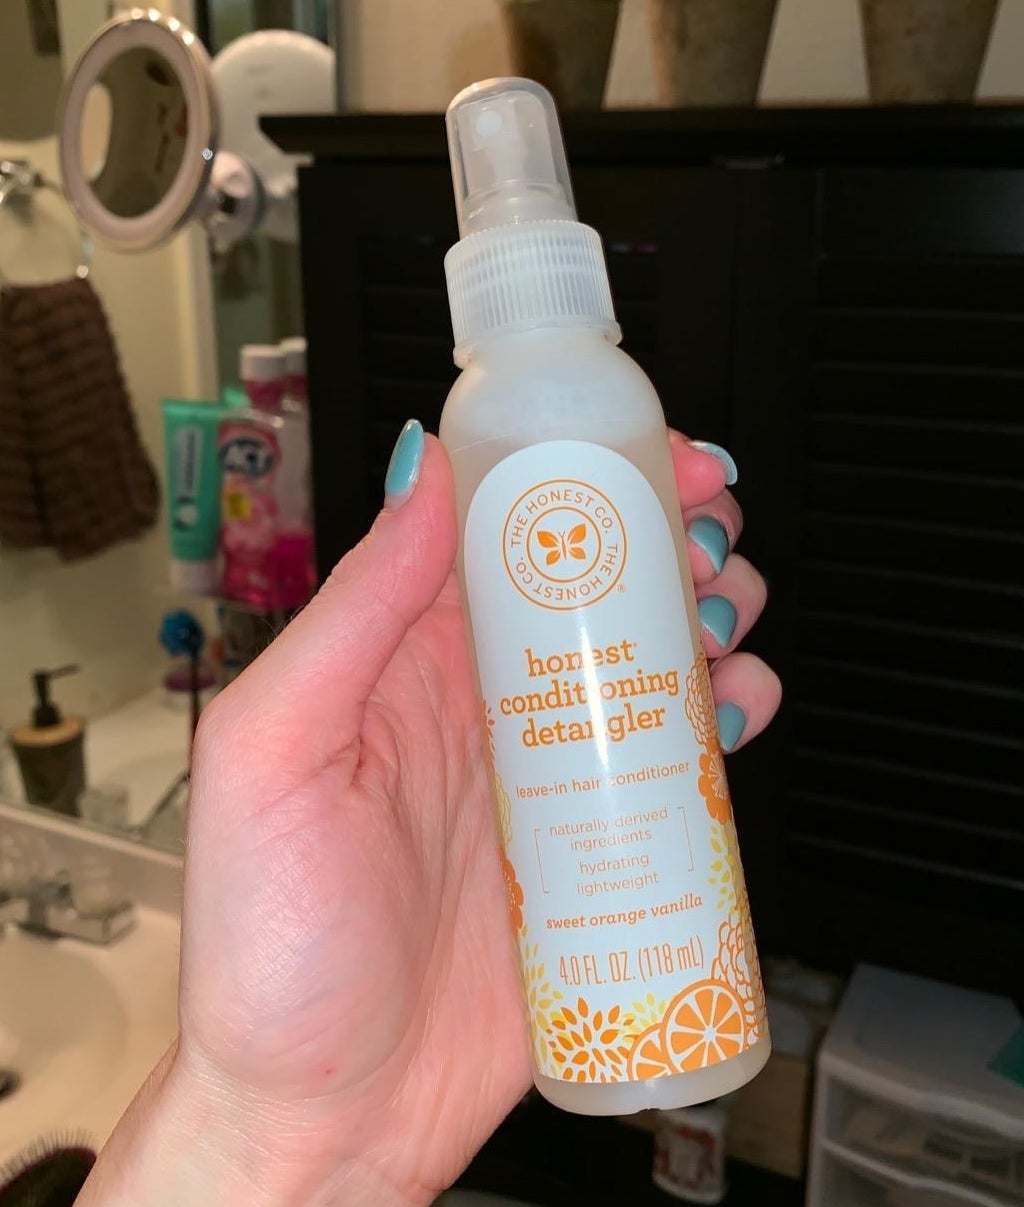 A hand holding the detangler spray bottle, which is about the size of a body spray or face mist 